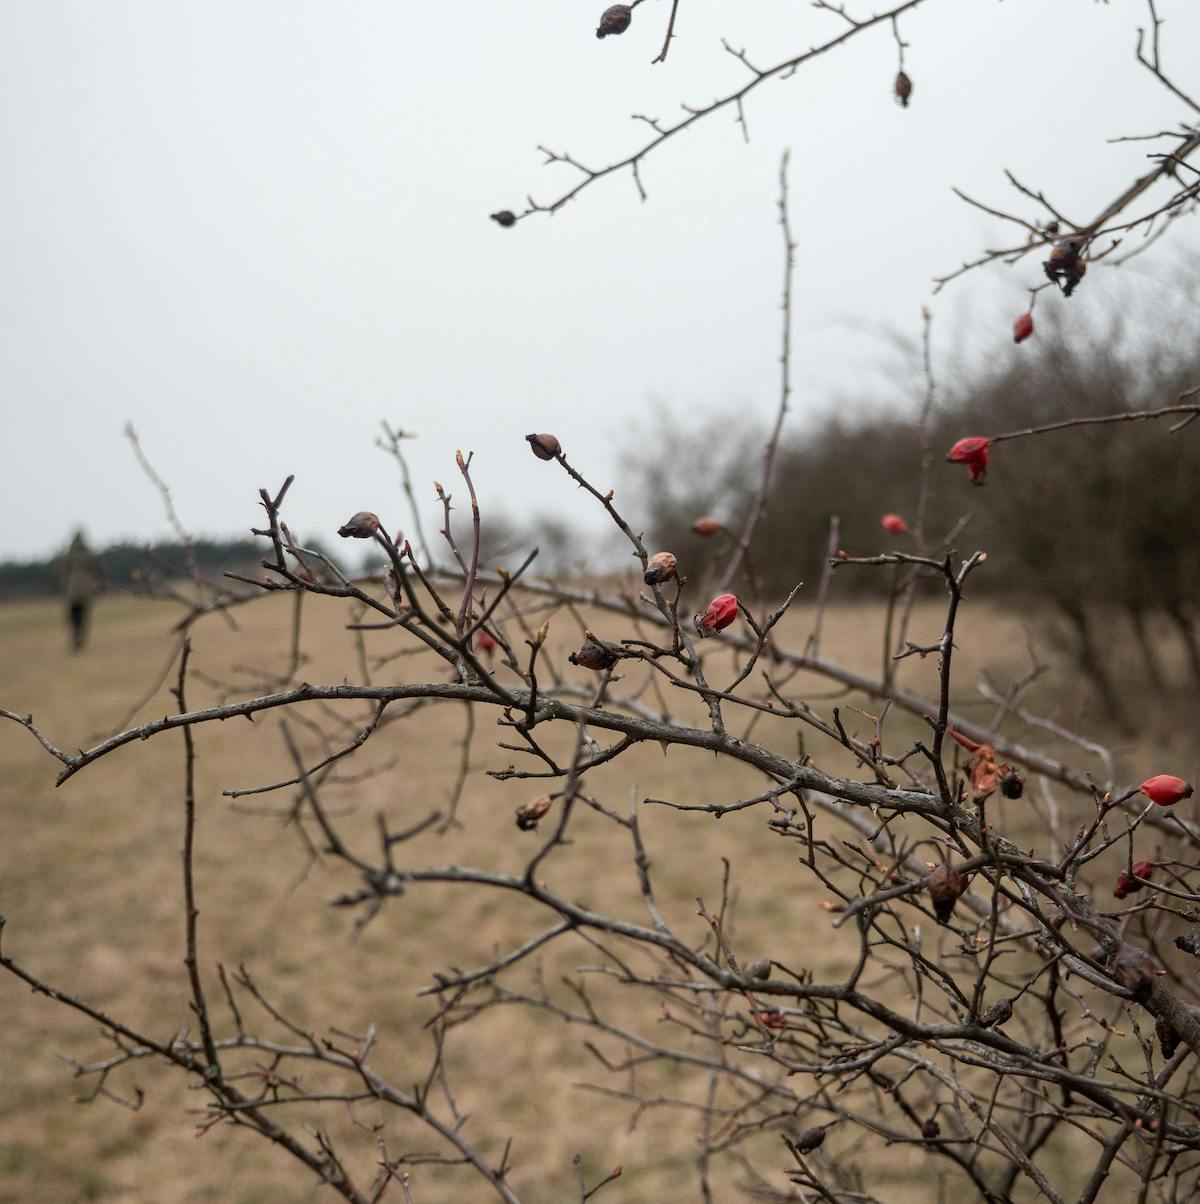 Berries cling to a the otherwise barren branches of a deciduous tree in winter